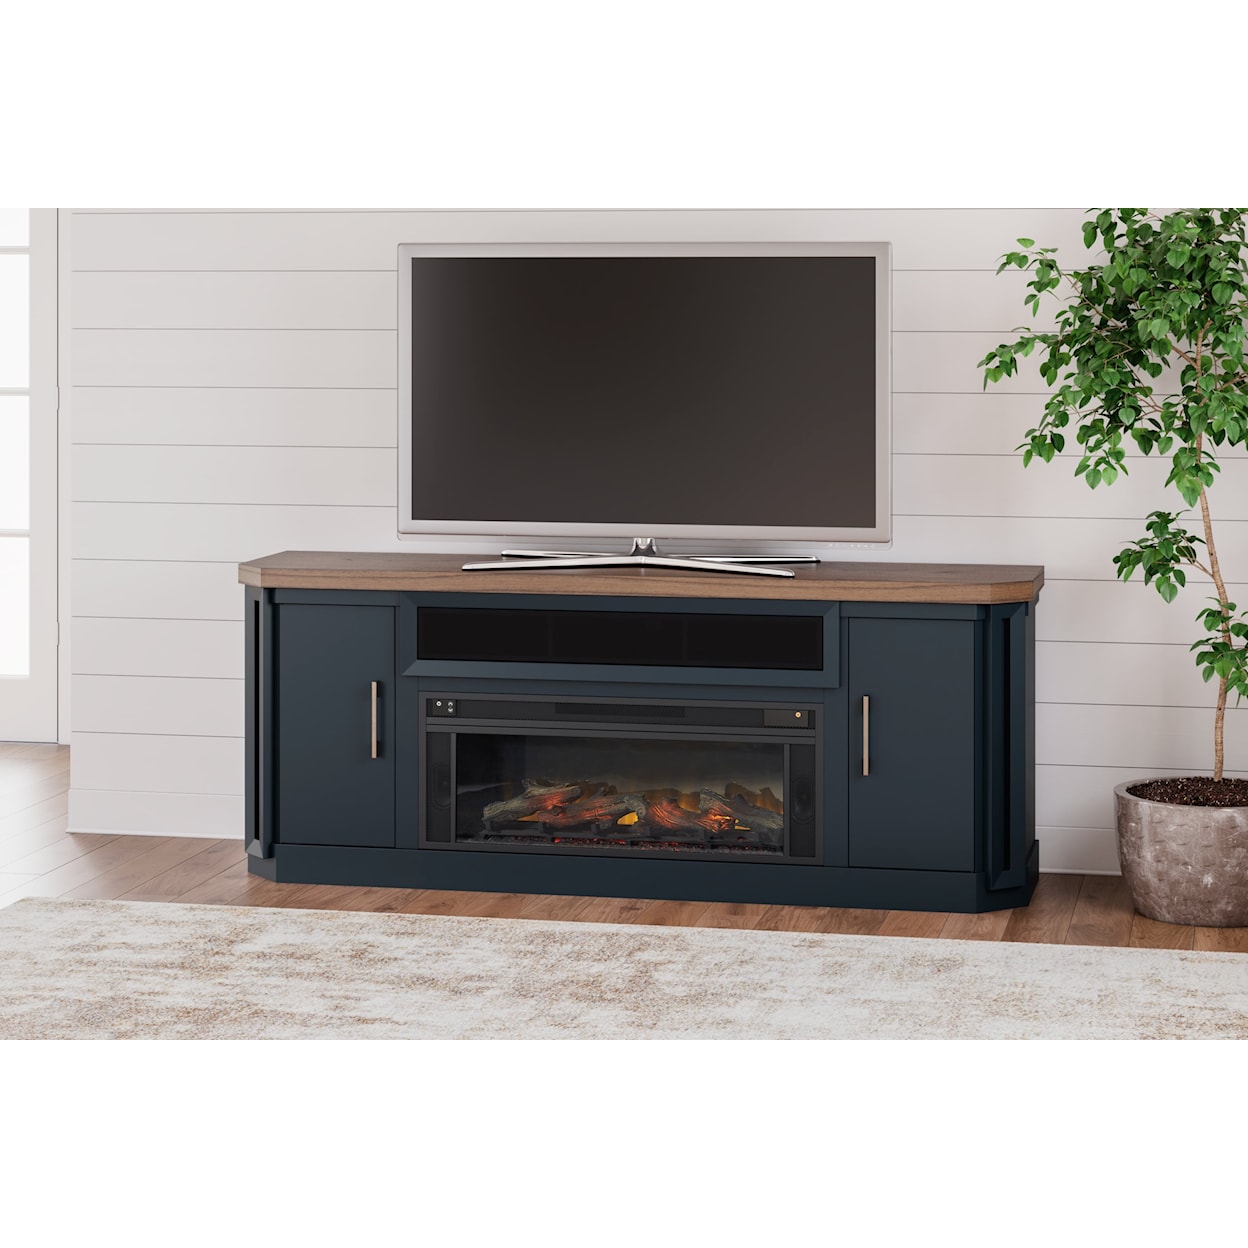 Signature Design by Ashley Furniture Landocken 83" TV Stand with Electric Fireplace